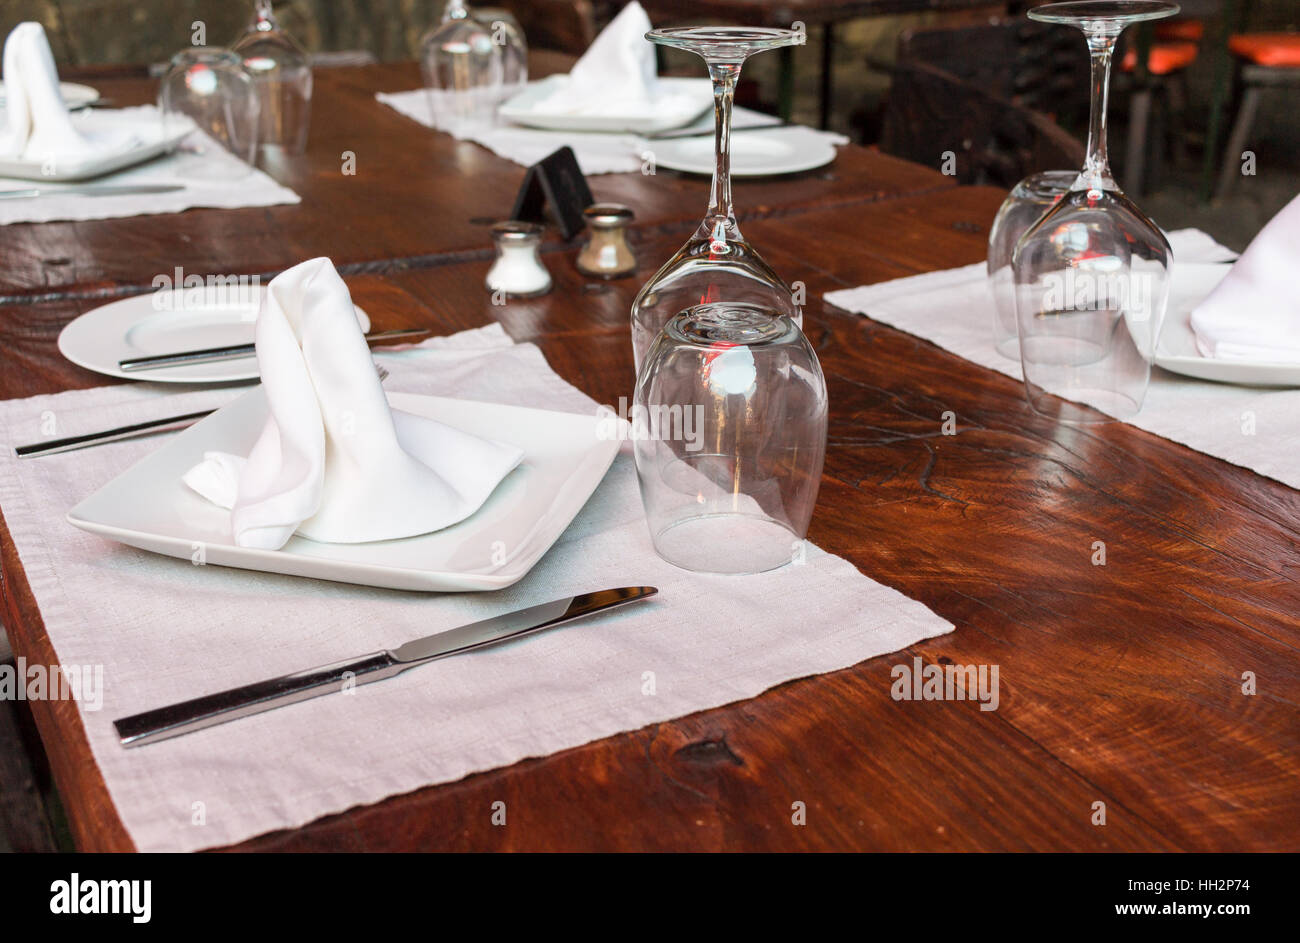 Restaurant table set with glasses, napkins and forks Stock Photo